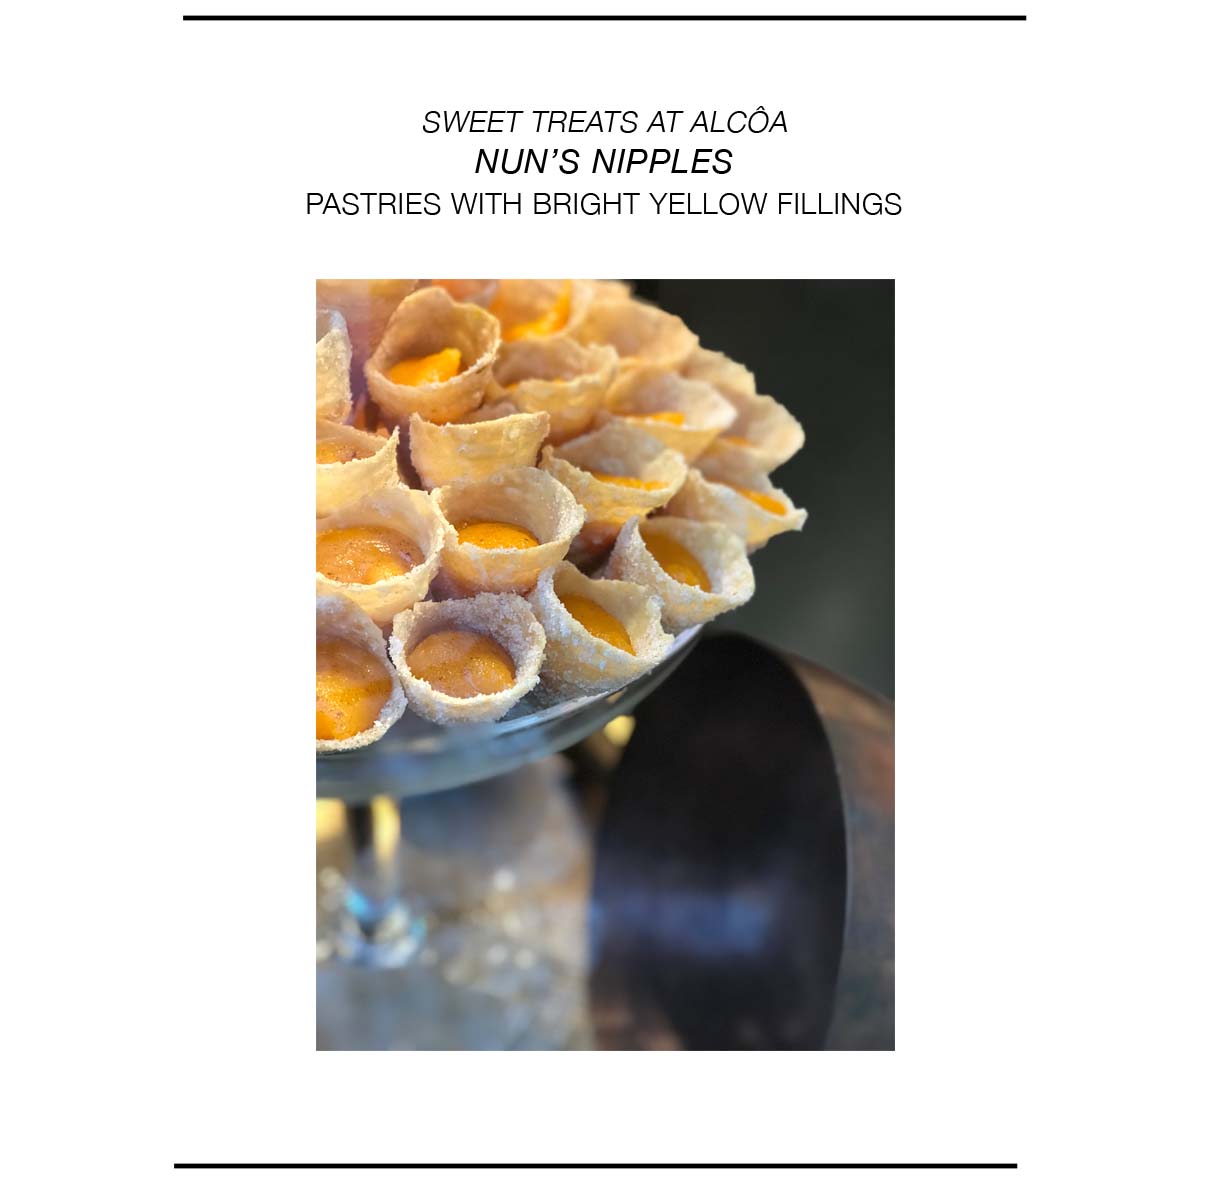 Portuguese pastries with bright yellow egg custard fillings from alcoa in lisbon.